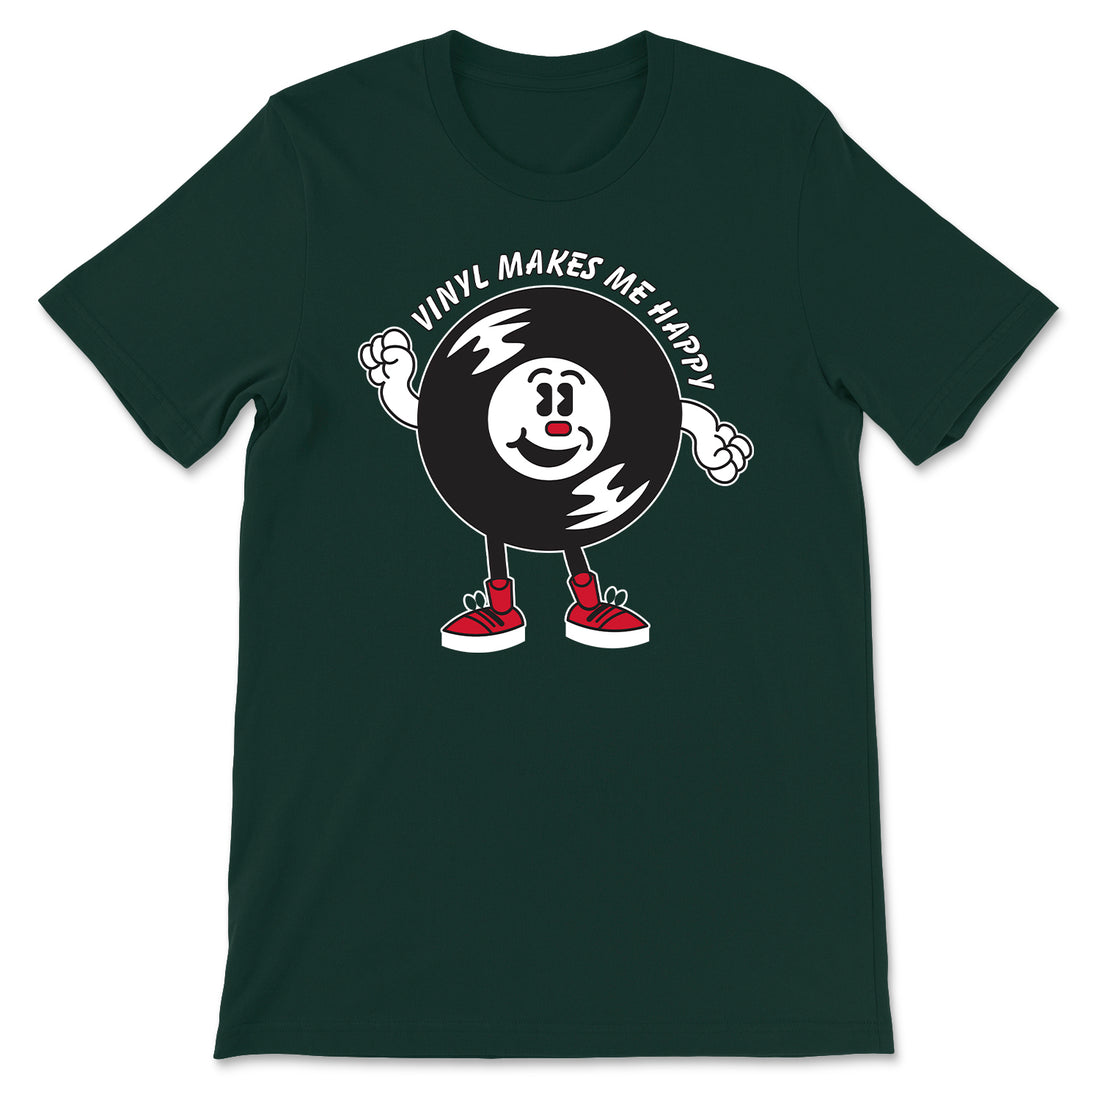 Vinyl Makes Me Happy T-Shirt Forest Green